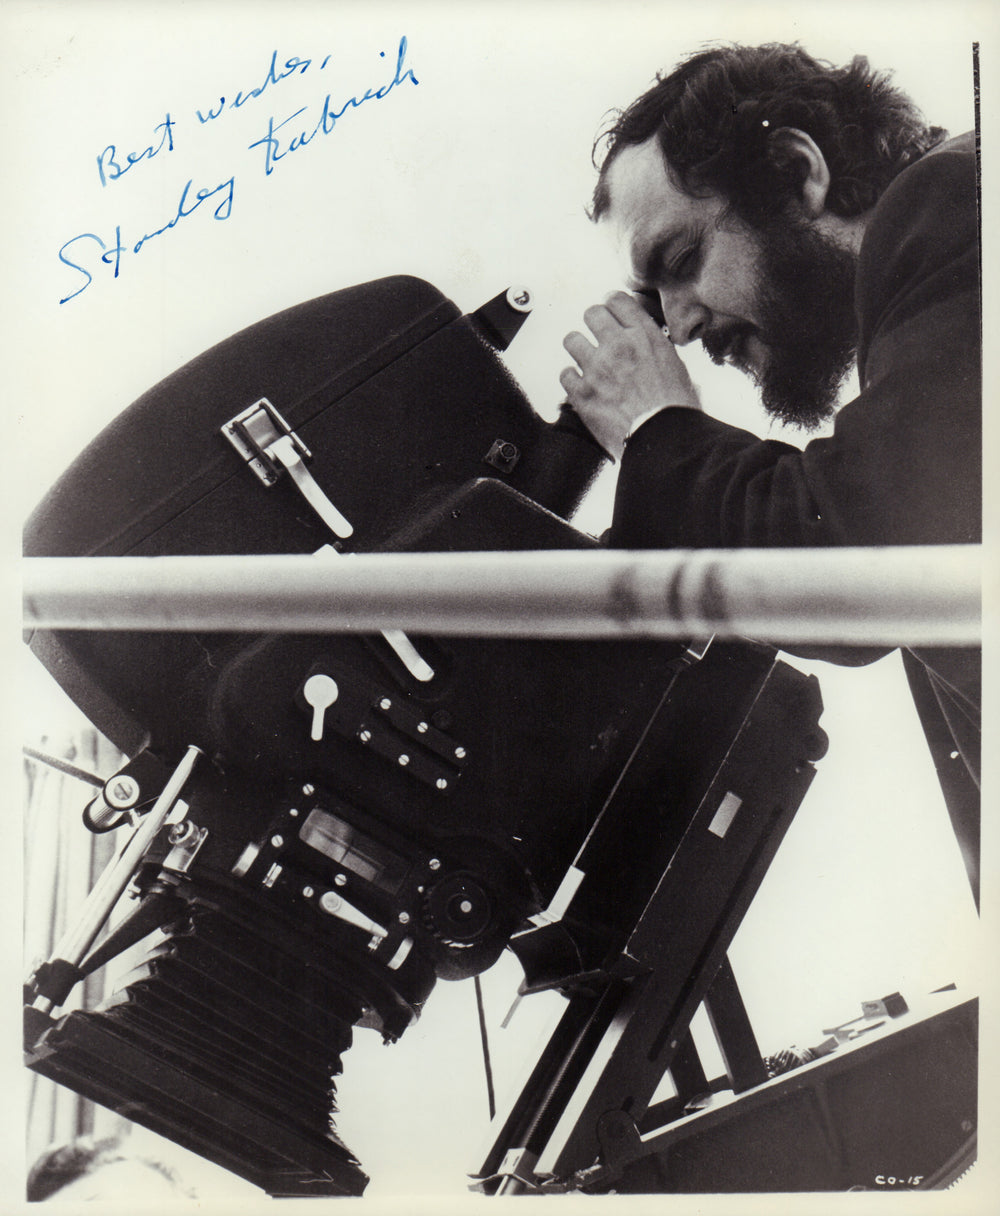 Stanley Kubrick Director of The Shining, 2001: A Space Odyssey, A Clockwork Orange, Full Metal Jacket, & Eyes Wide Shut - Very Rare Signed 8x10 Photo